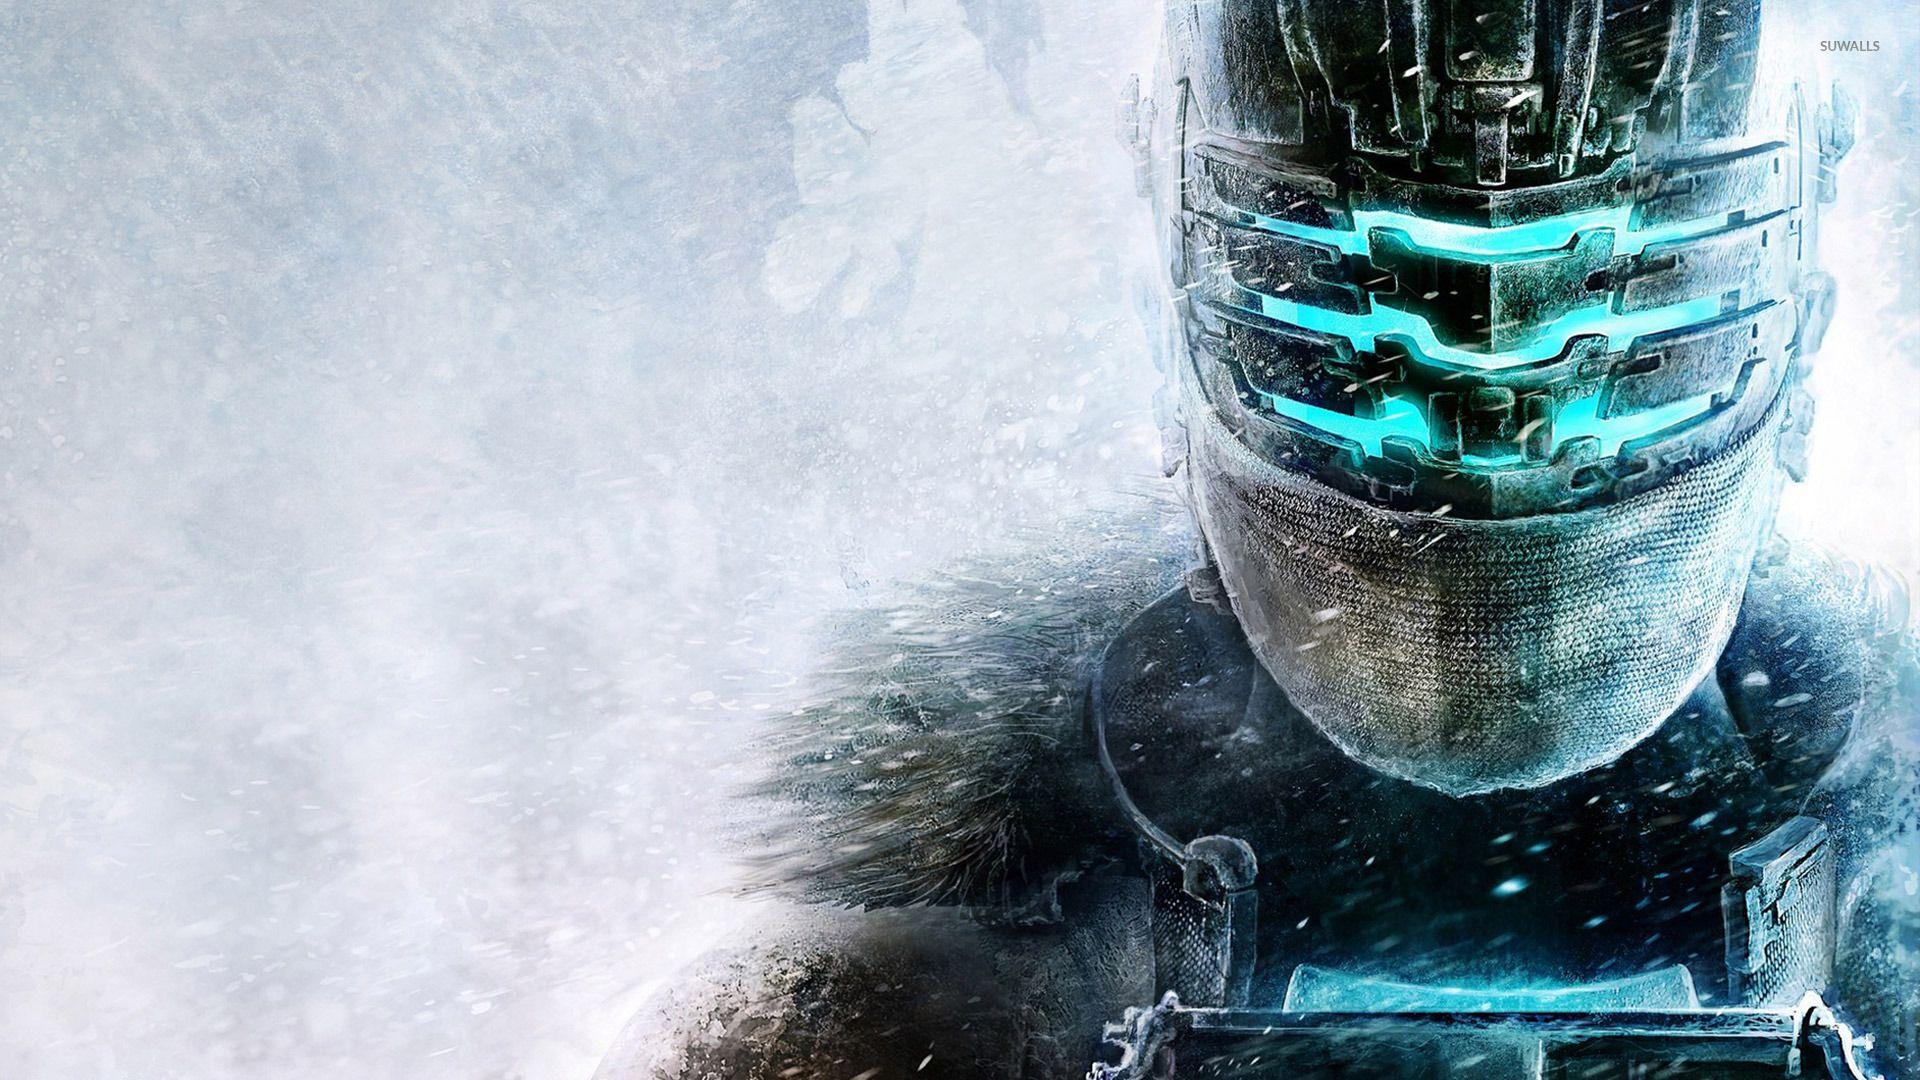 Dead Space Wallpapers 1920x1080 - Wallpaper Cave